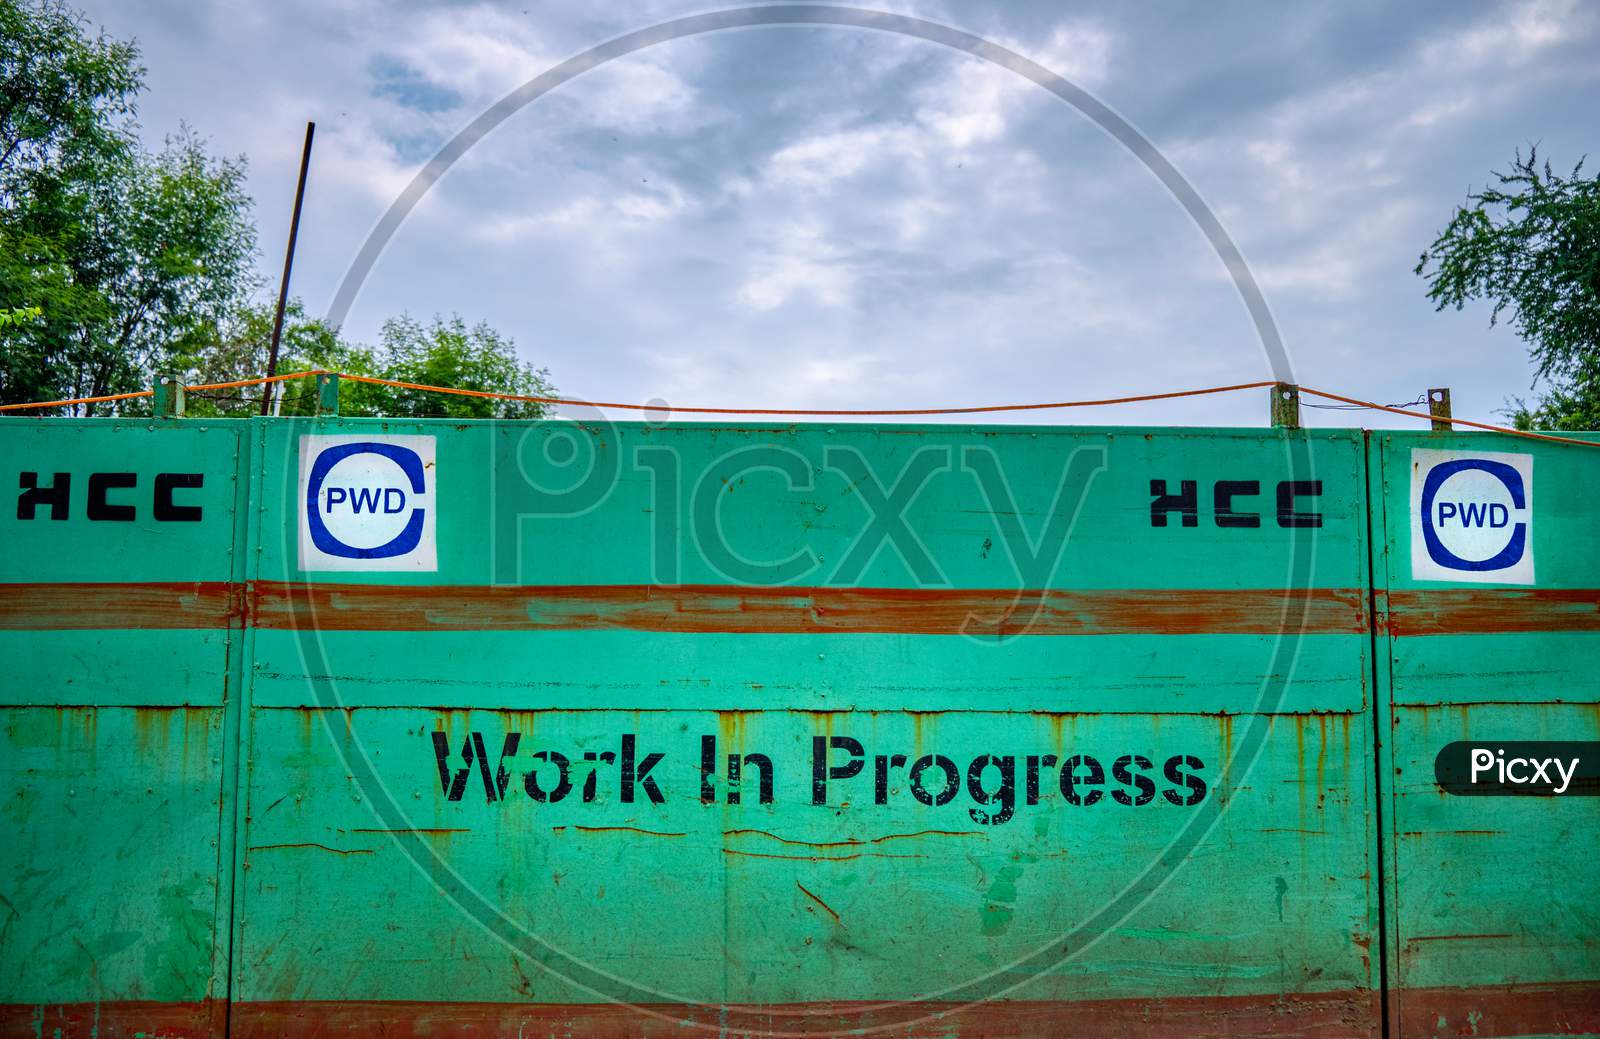 Work In Progress Sign In New Delhi, India. Hindustan Construction Company (Hcc) Contracted By The Public Works Department (Pwd) Of The Government Of Delhi